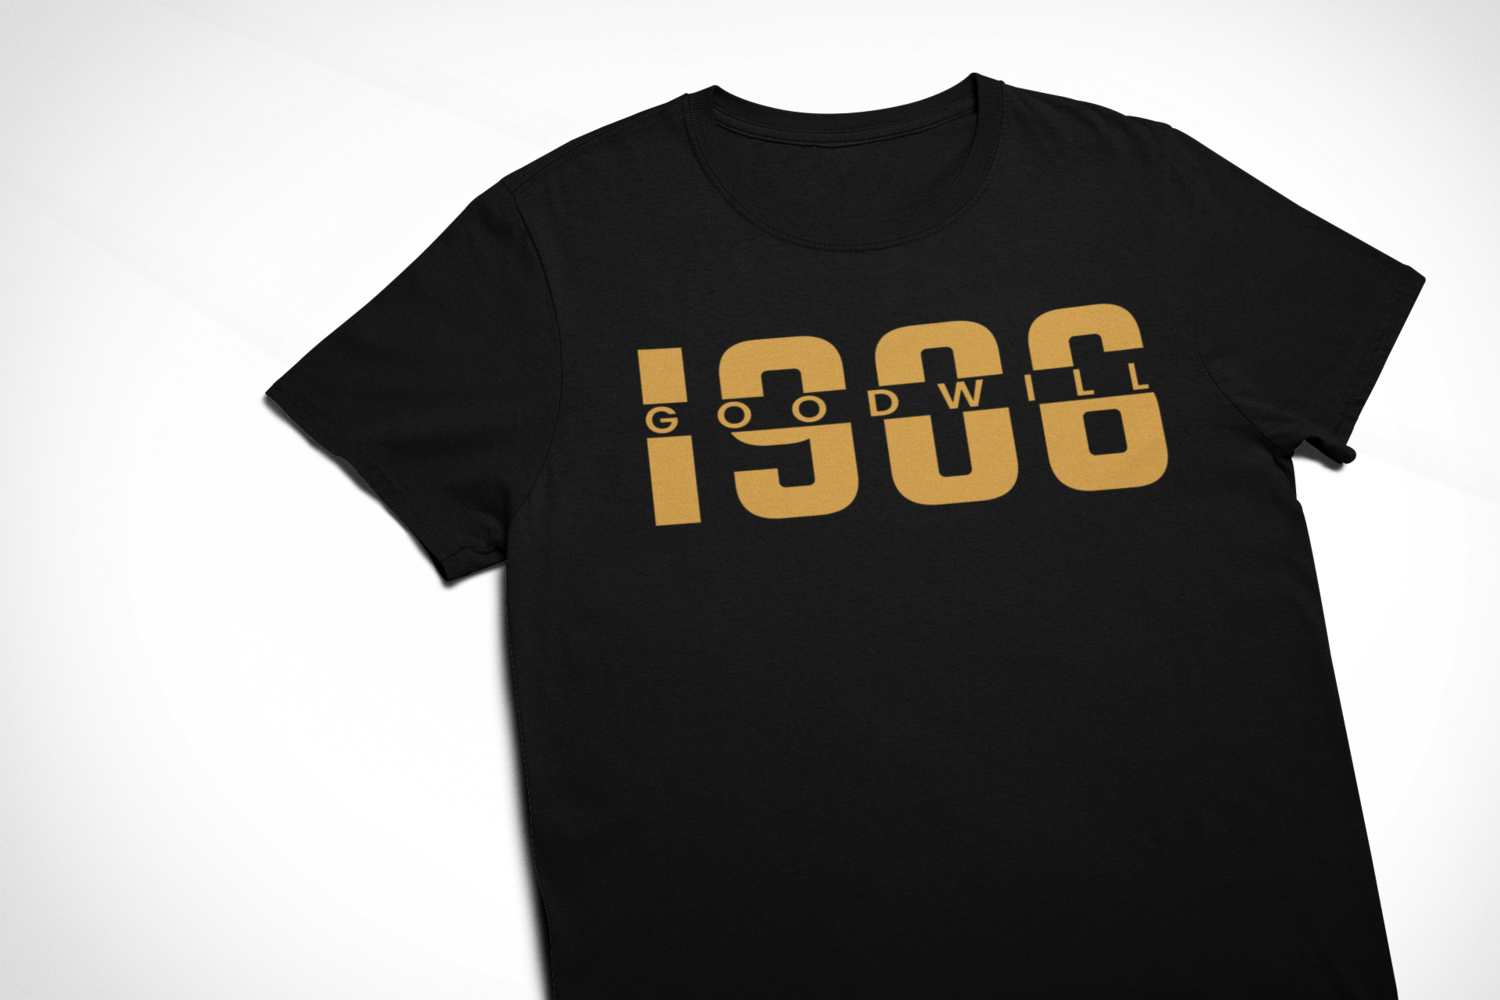 APhiA 1906 Goodwill Value T-Shirt by Afflatus